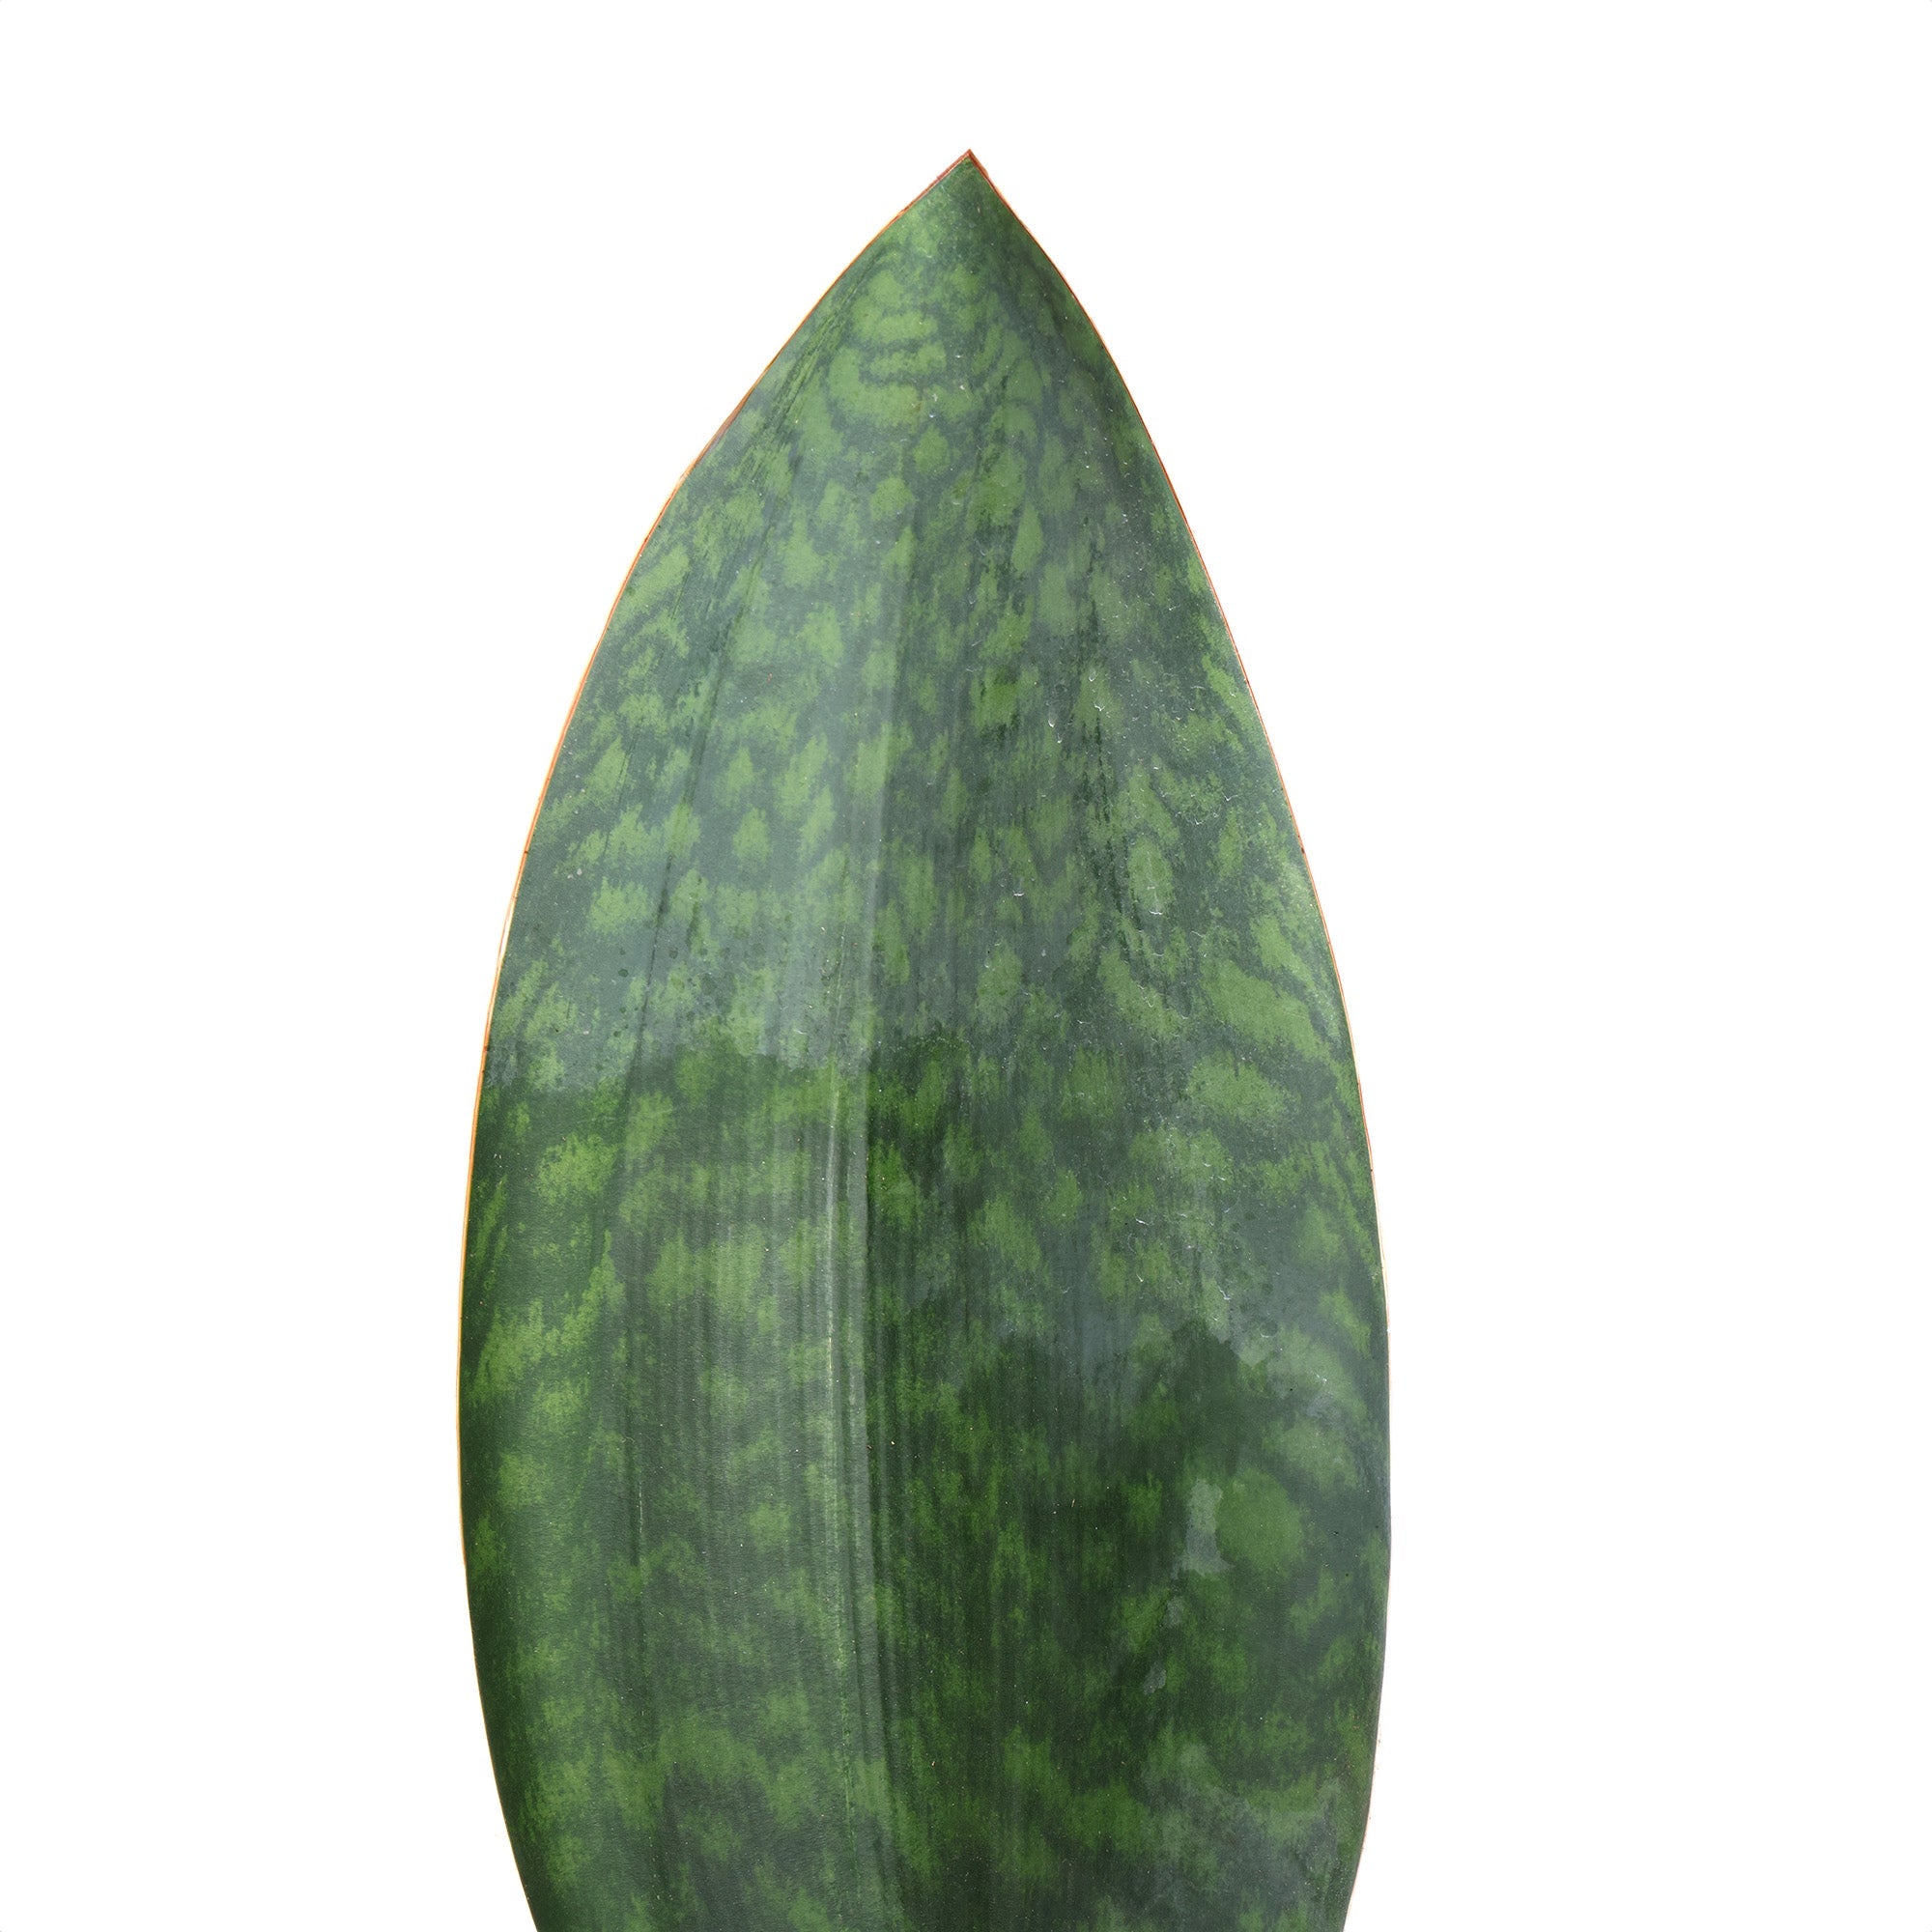 A single Snake Plant Victoria 6 Inches from Chive Studio with a long, upright leaf, growing in a black pot against a white background.